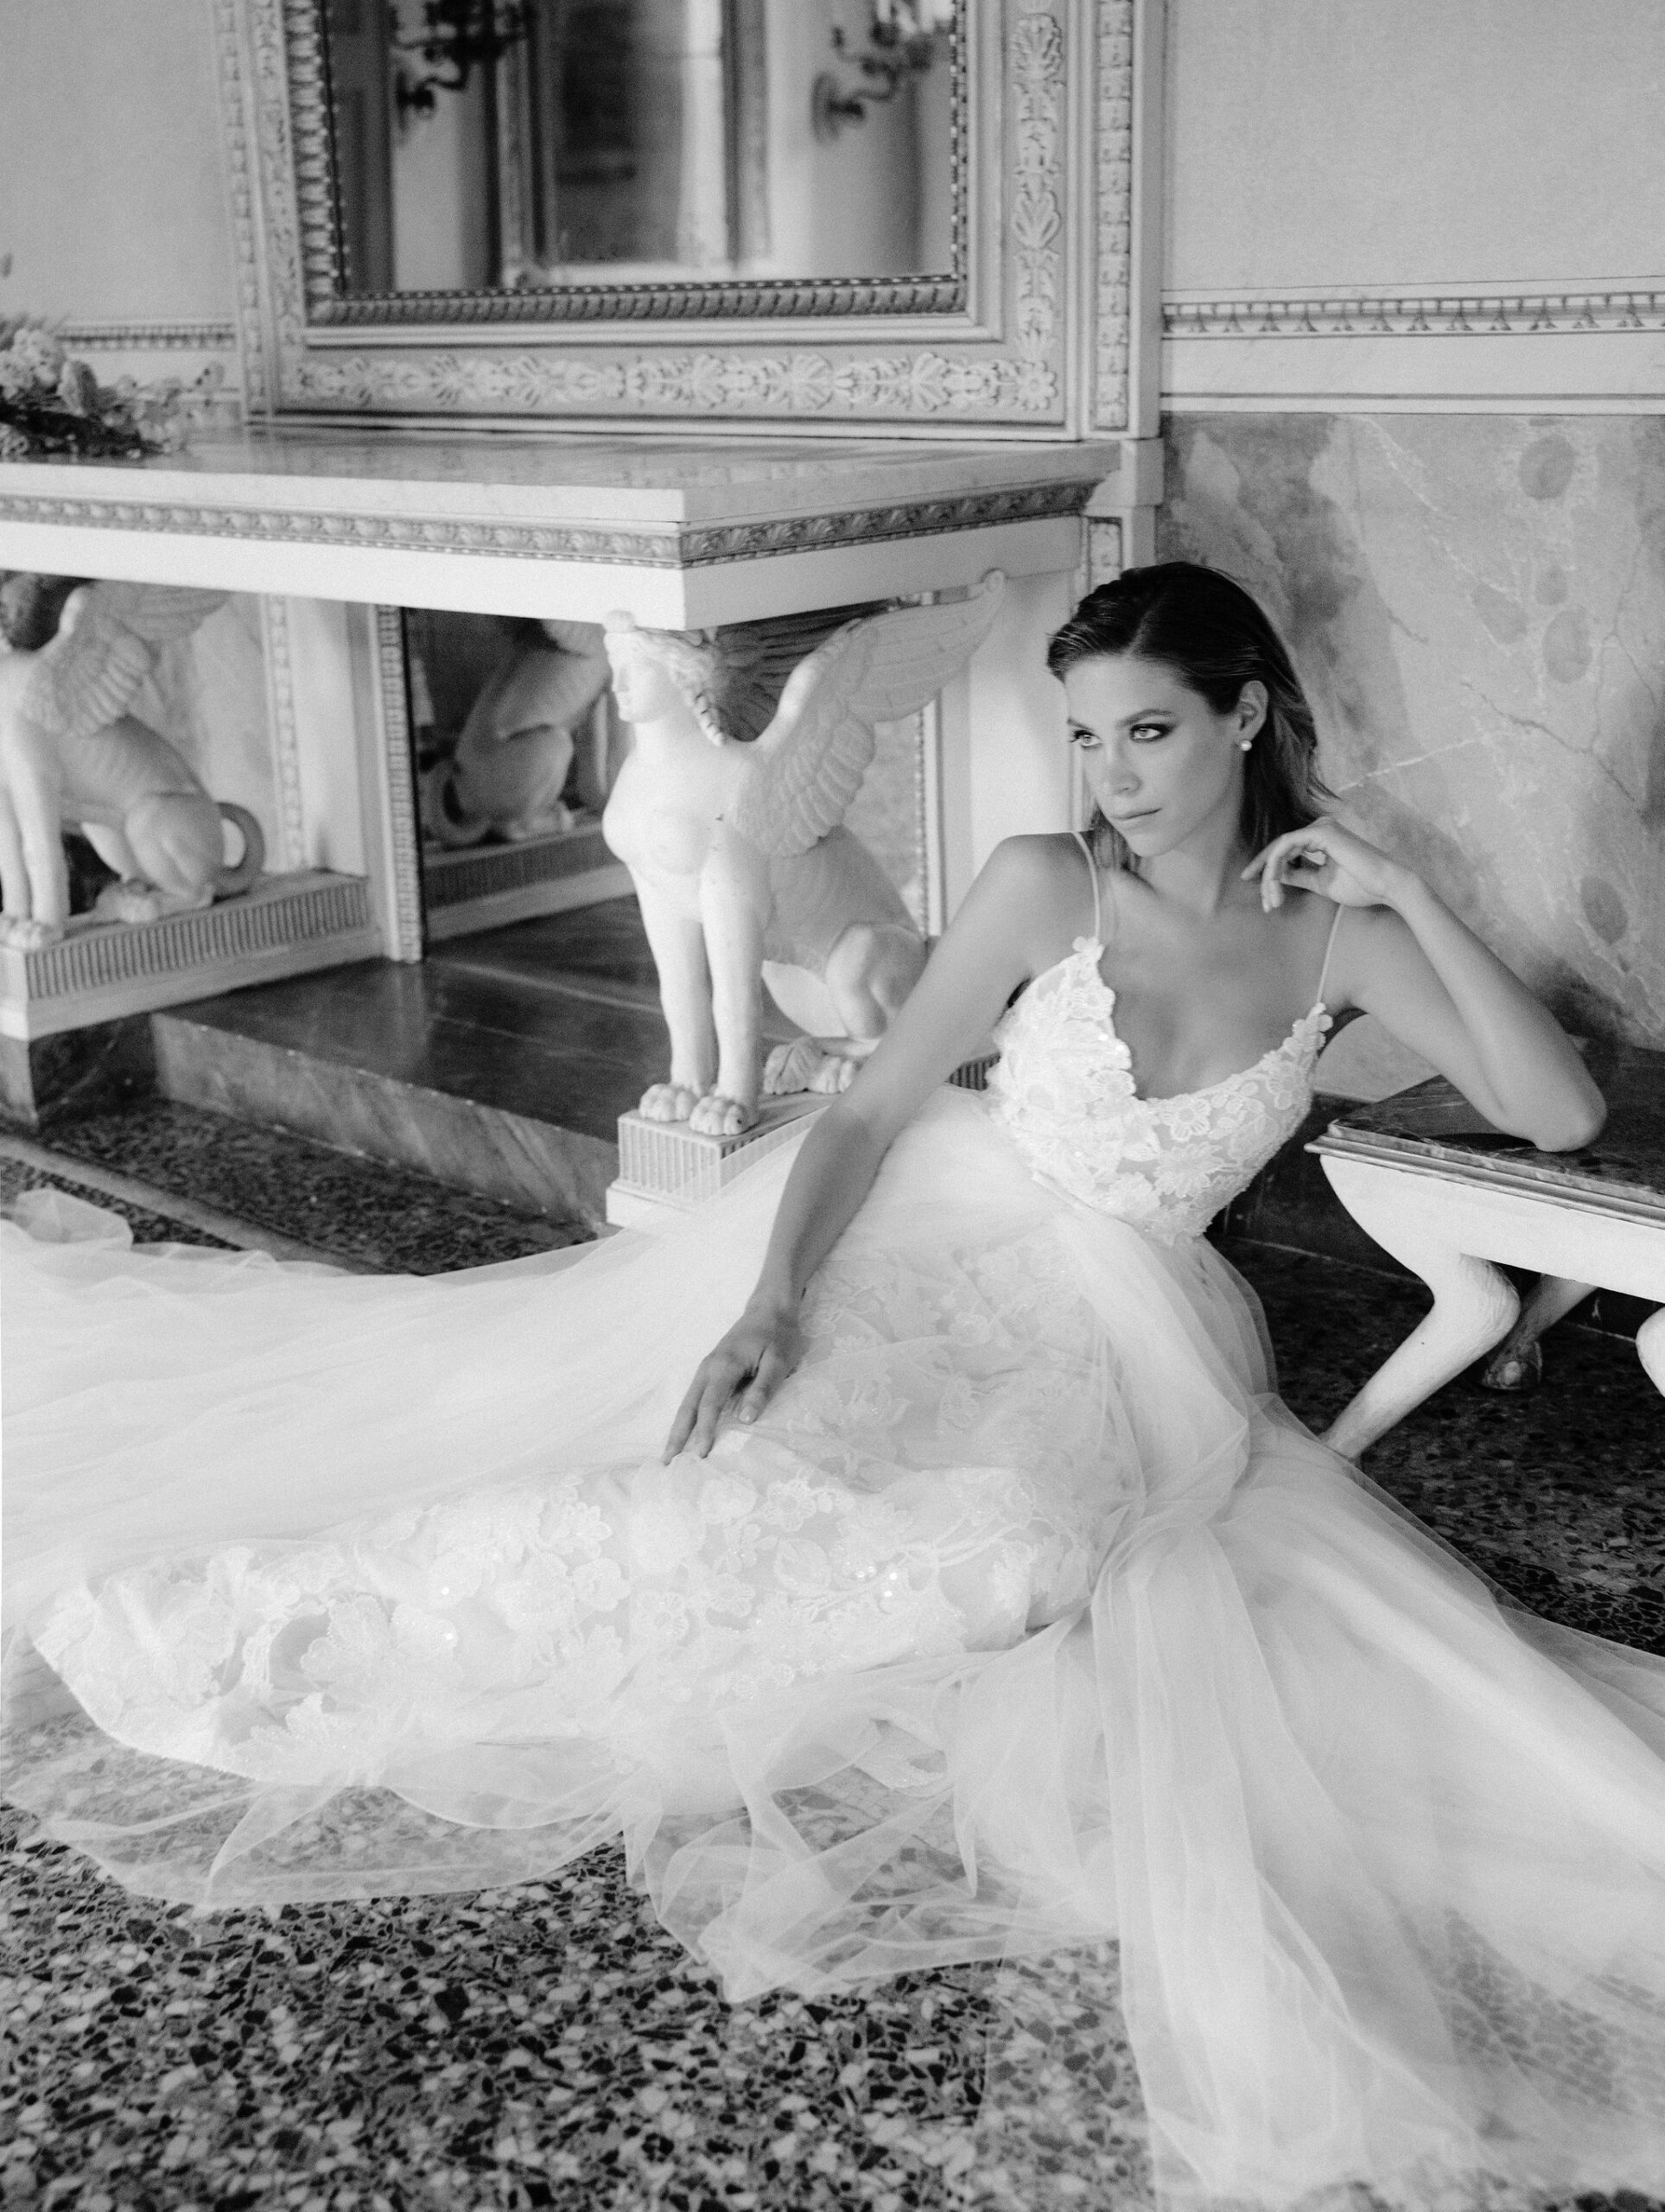 The Top 5 Israeli Wedding Dress Designers that Every Bride Should